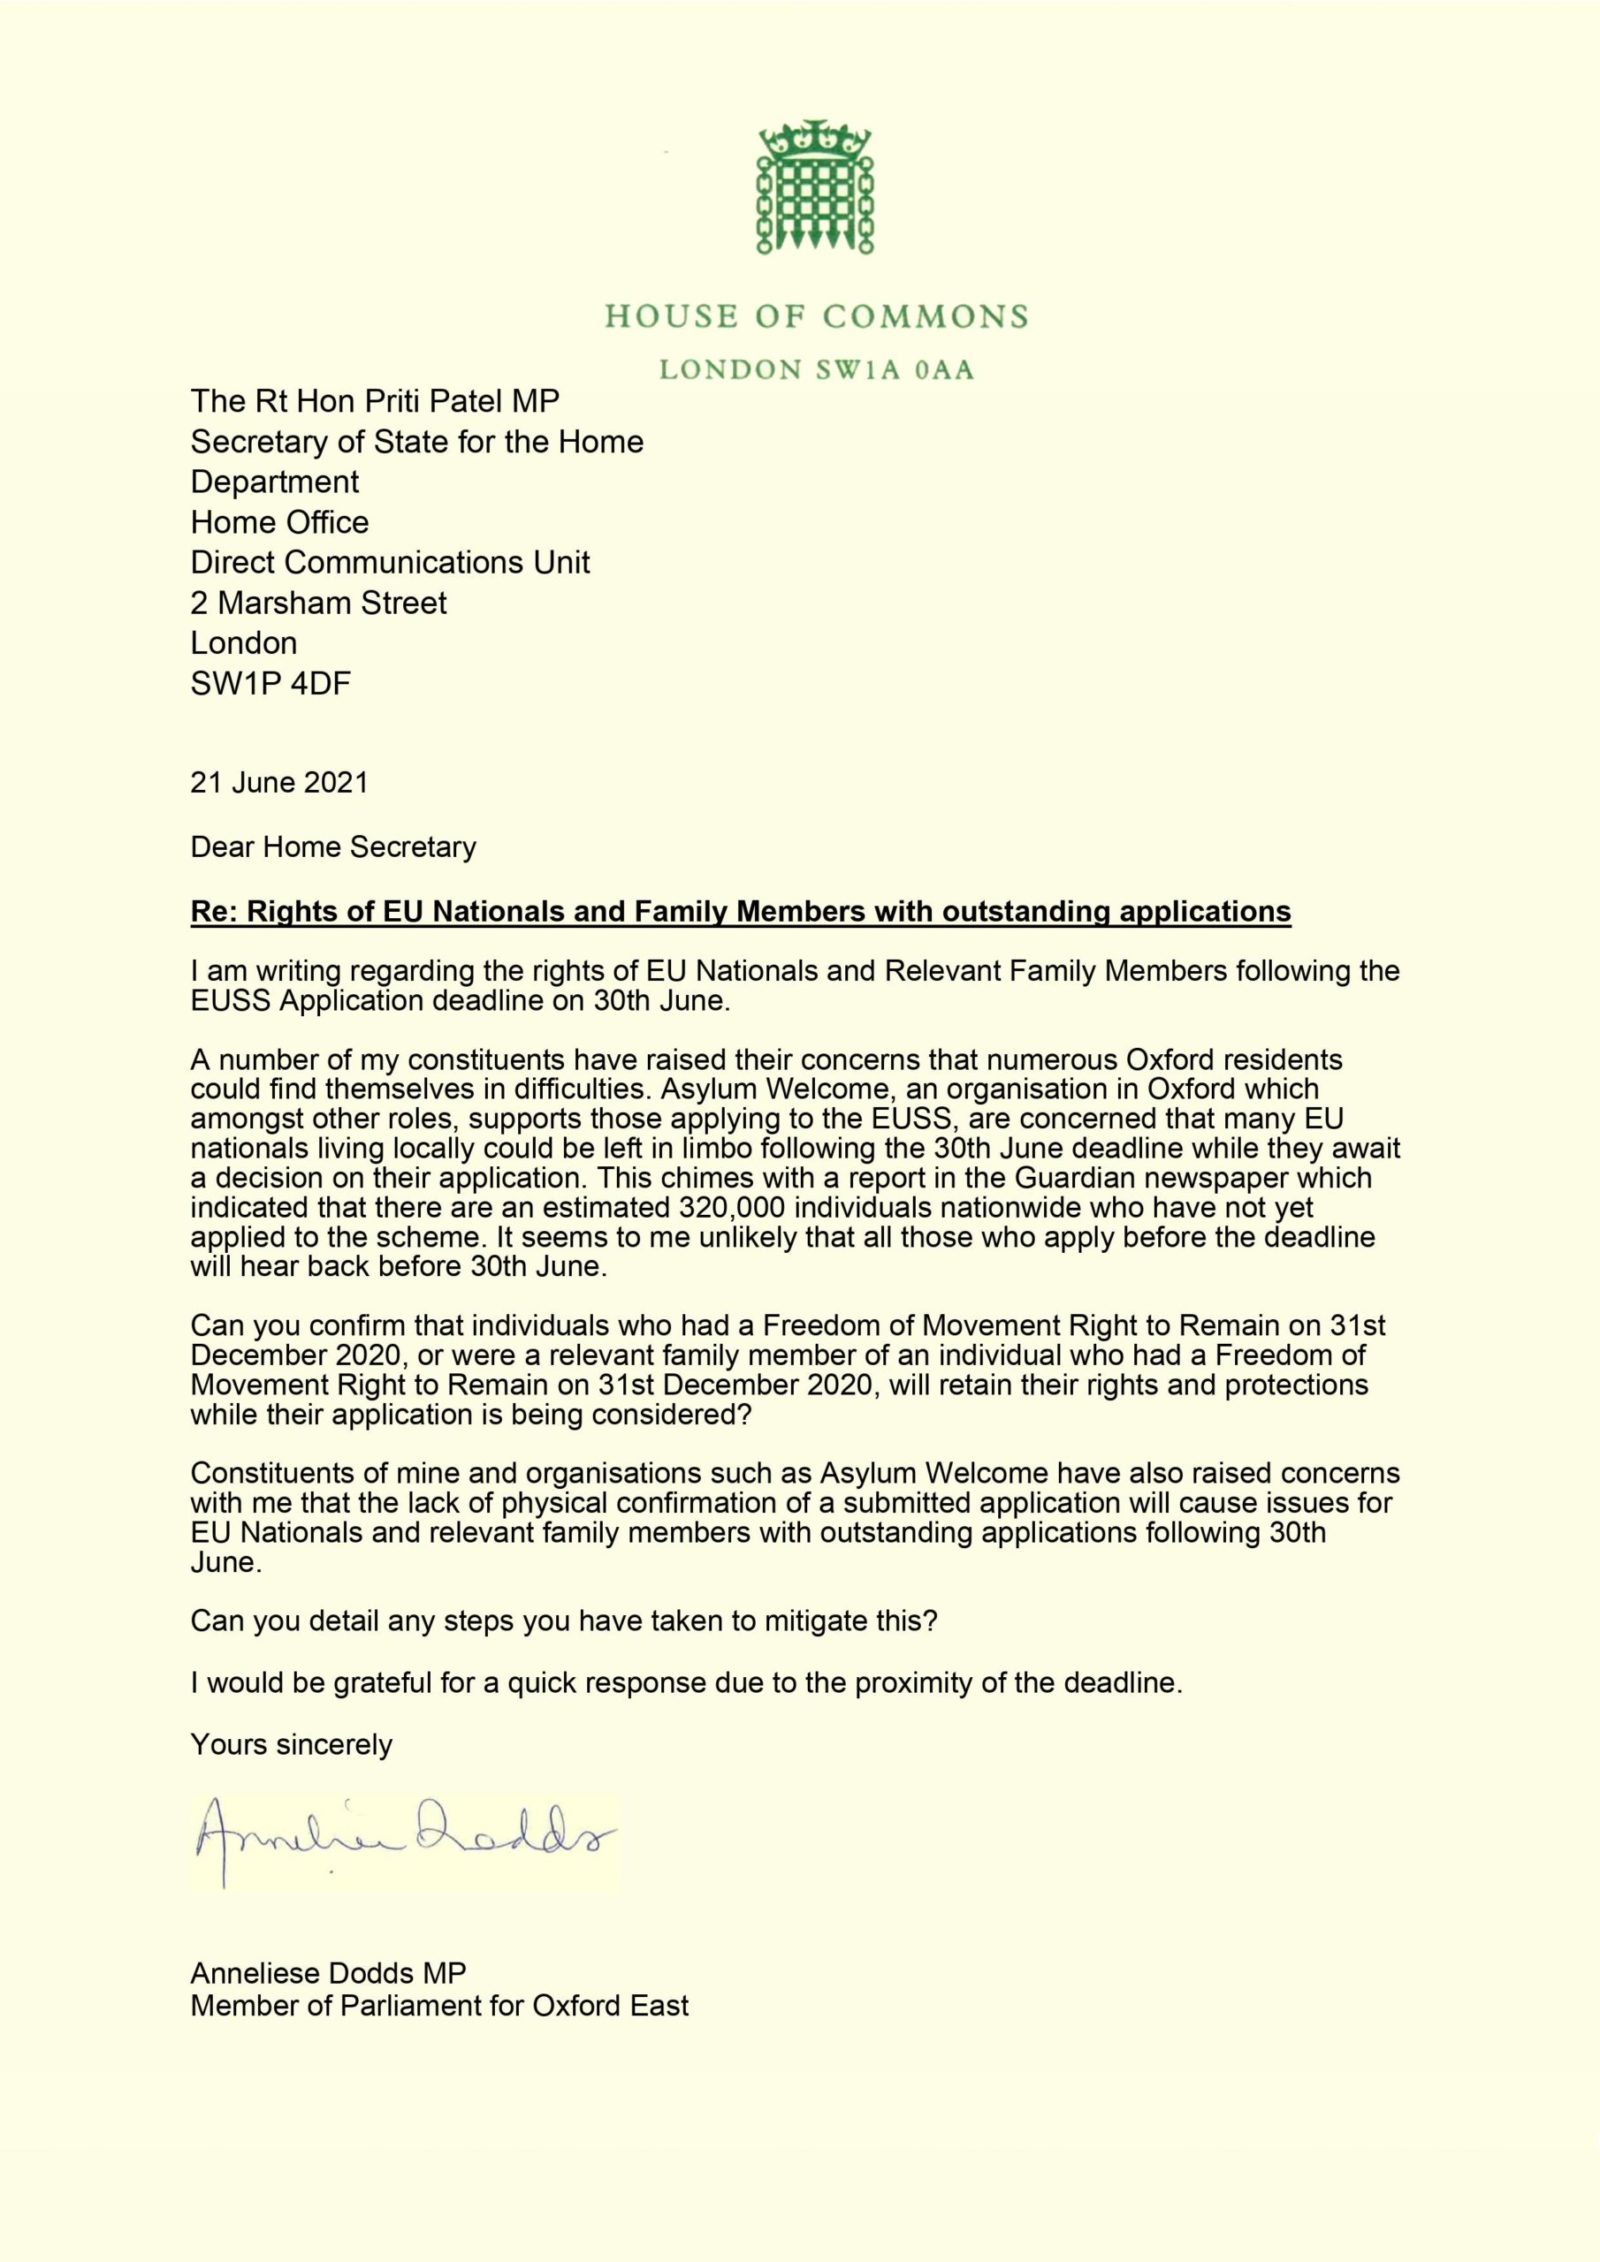 Anneliese Dodds MP letter to the Home Secretary regarding EUSS pending applications